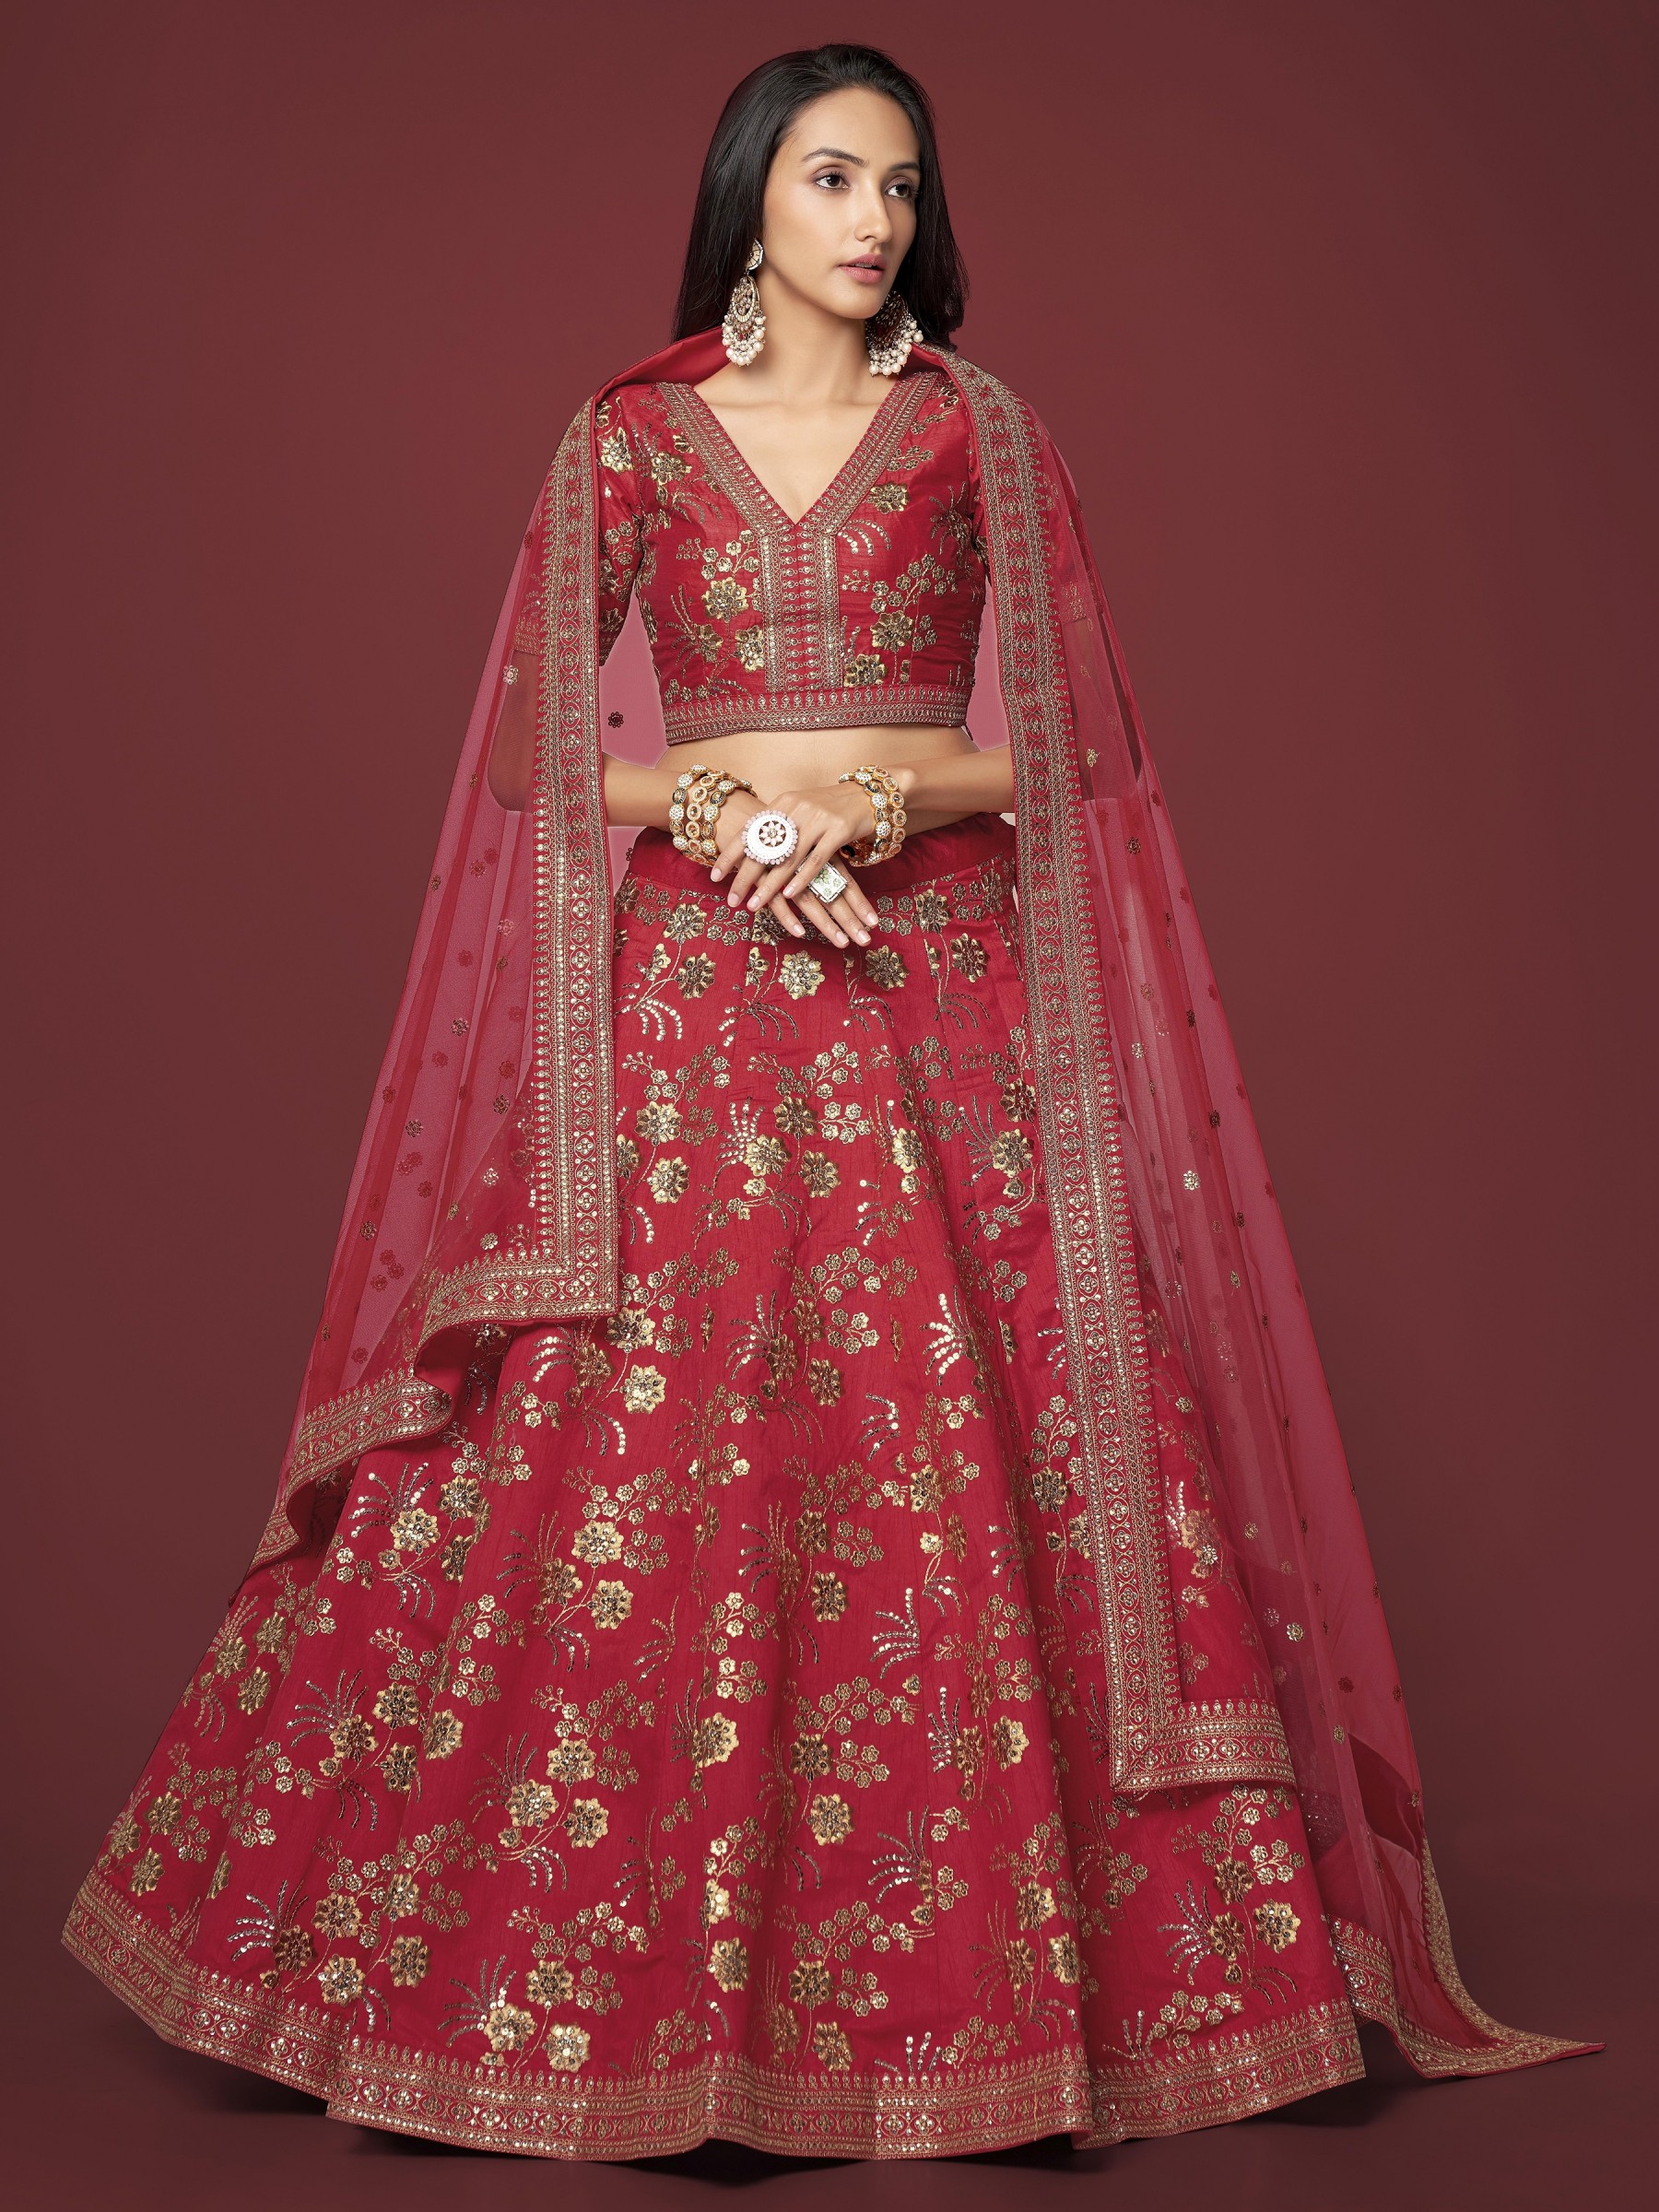  Silk  Party Wear Lehenga In Red Color With Embroidery Work